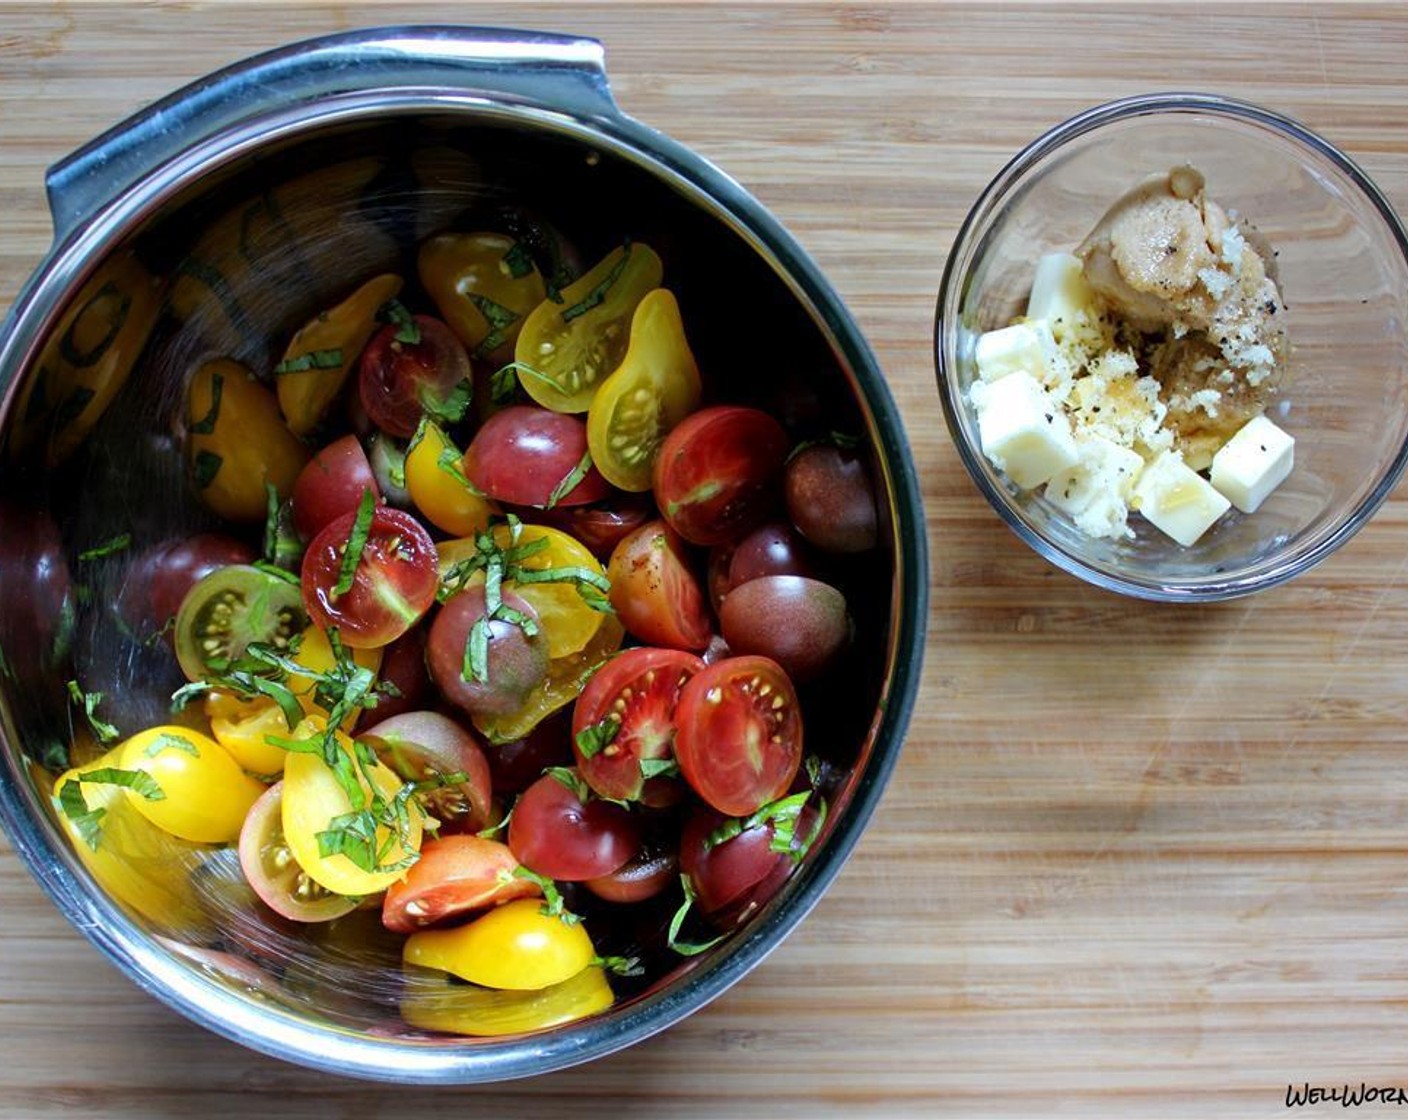 step 4 To make the tomato salad, mix the White Miso Paste (2 Tbsp), Butter (2 Tbsp), Honey (1/2 tsp), Horseradish Root (1/2 Tbsp), Fresh Basil (2 Tbsp), Fresh Chives (2 Tbsp), Salt (to taste) and Ground Black Pepper (to taste) in a bowl. Toss with the Cherry Tomatoes (3 cups).